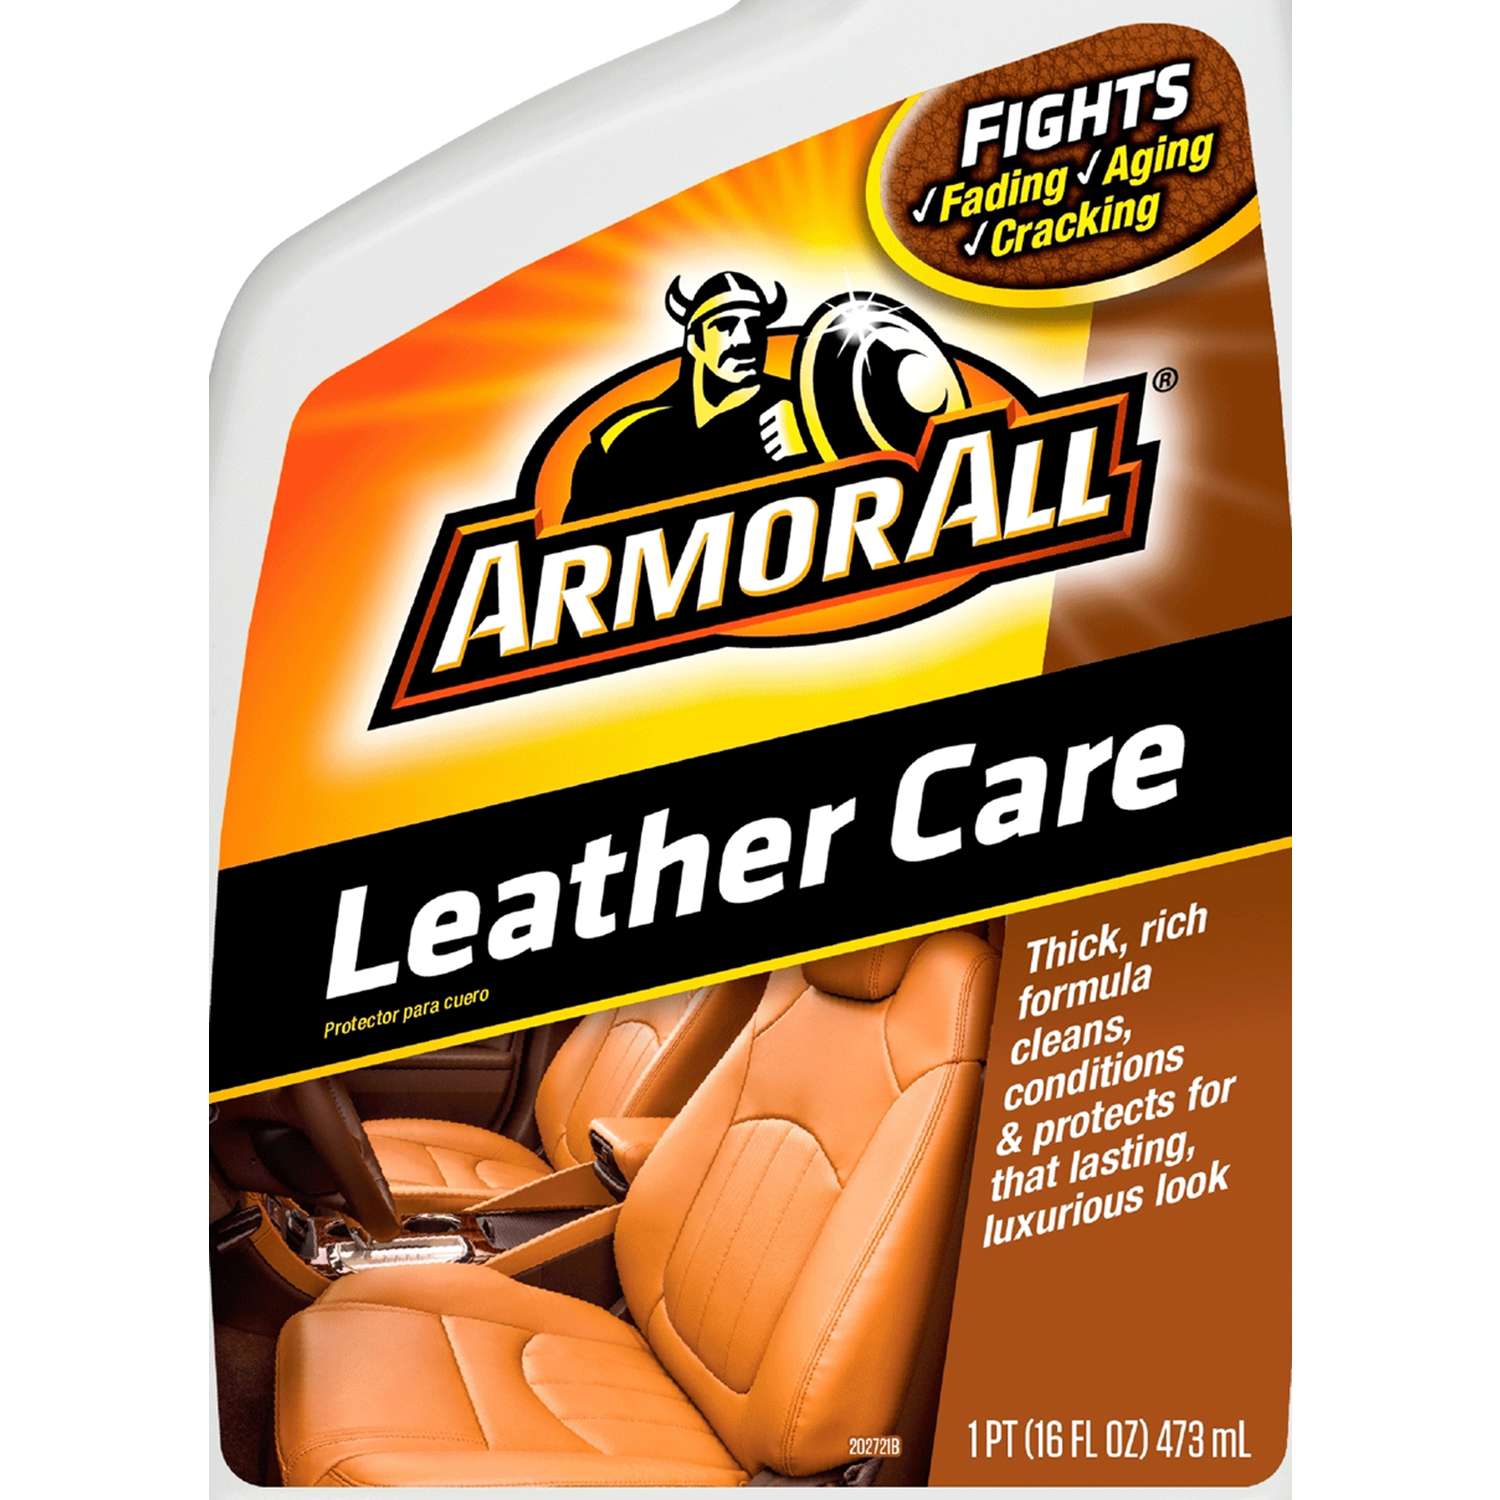 Armor All Car Leather Care Spray , Leather Cleaner and Protectant for Cars,  Trucks and Motorcycles, 16